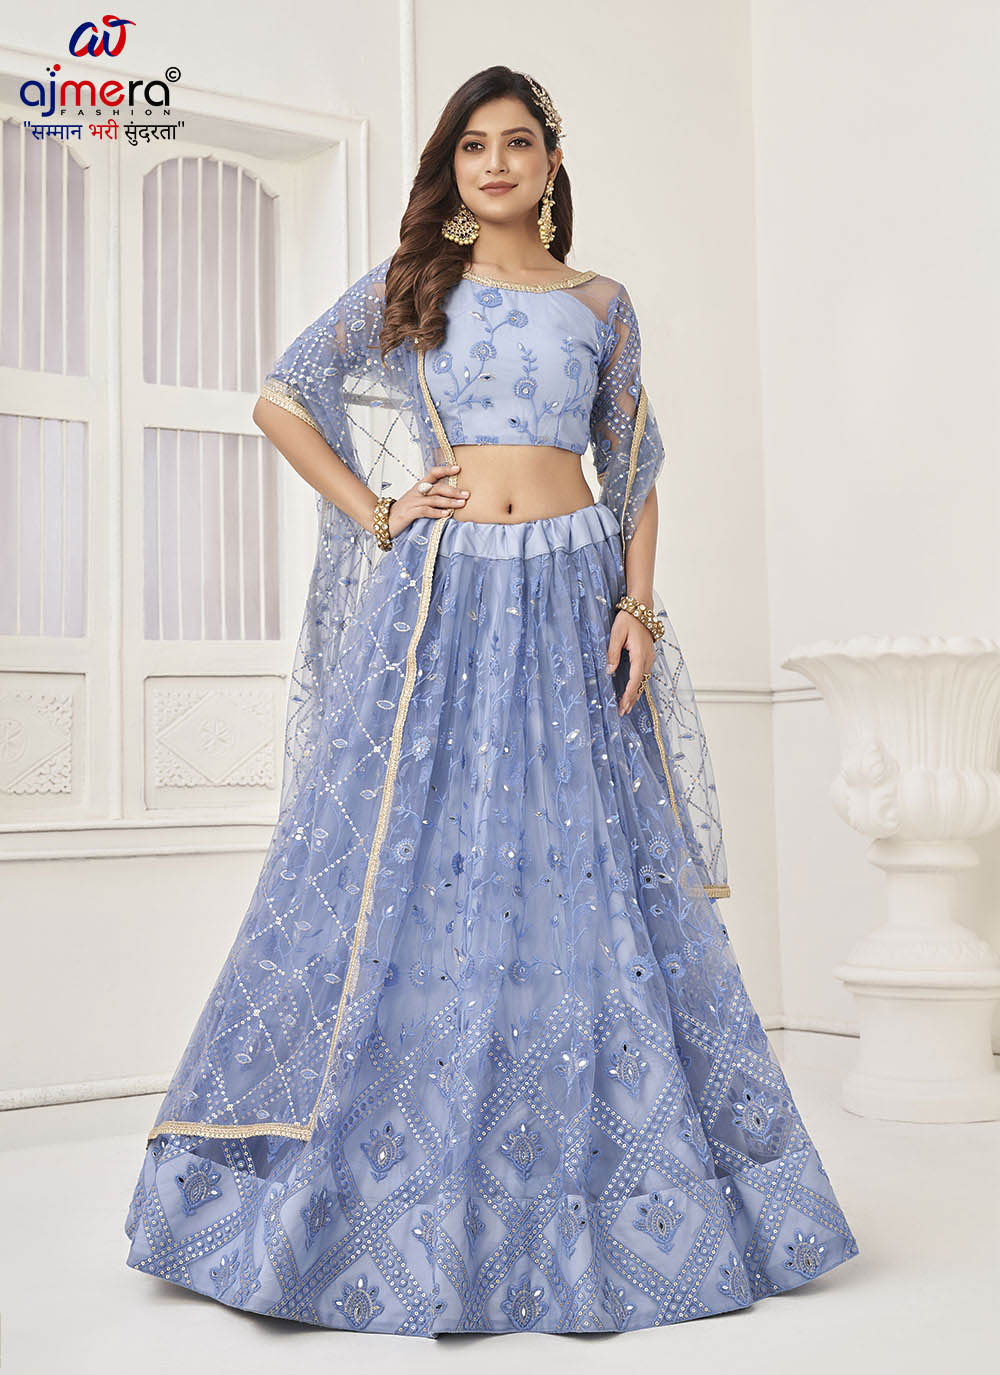 Net Pair Lehnga (2) Manufacturers, Suppliers in Hyderabad